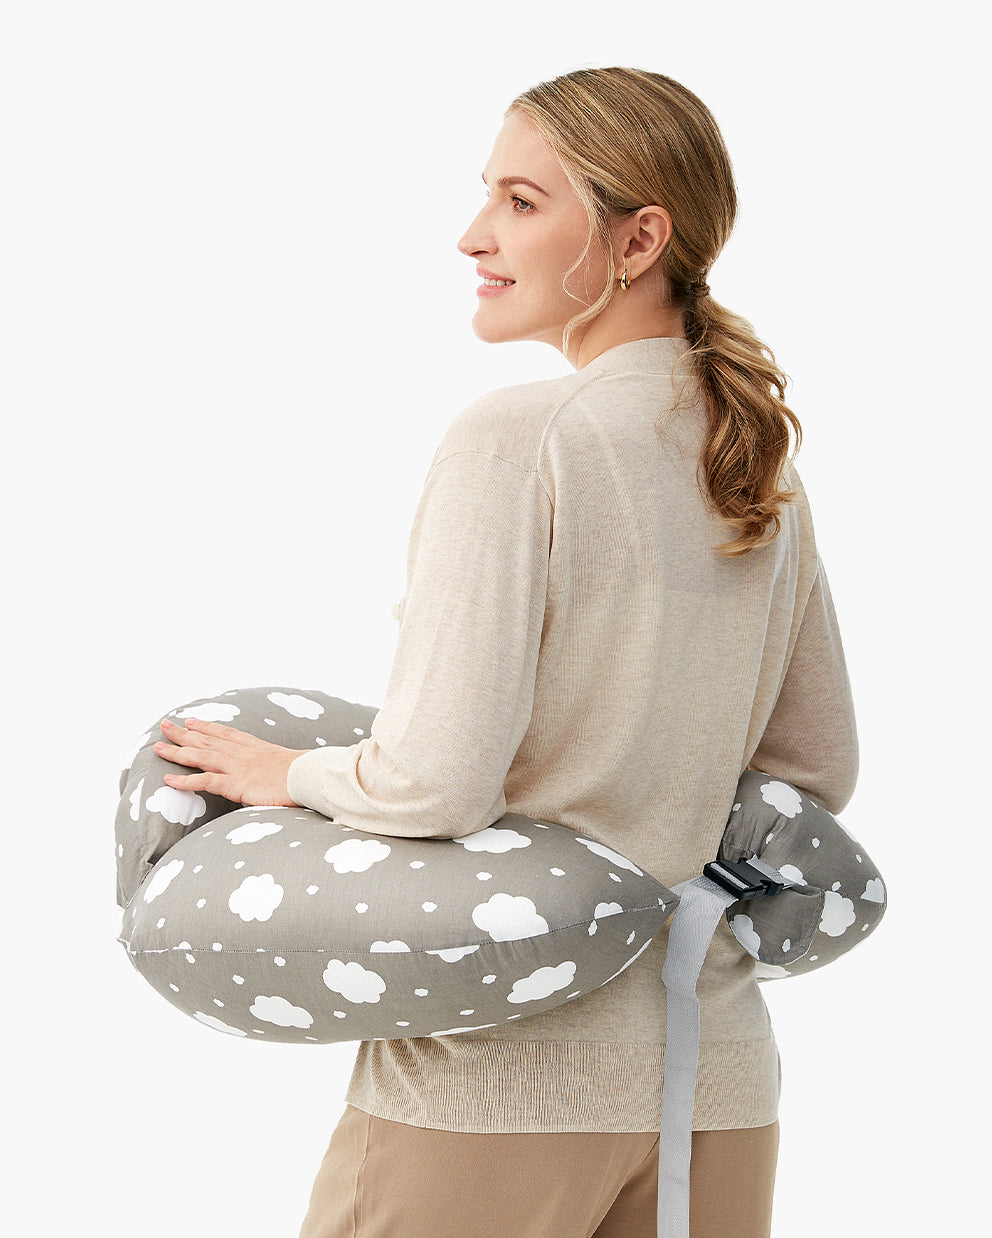 Momcozy Nursing Pillow for Breastfeeding, Original Plus Size Breastfeeding  Pillows for More Support for Mom and Baby, with Adjustable Waist Strap and